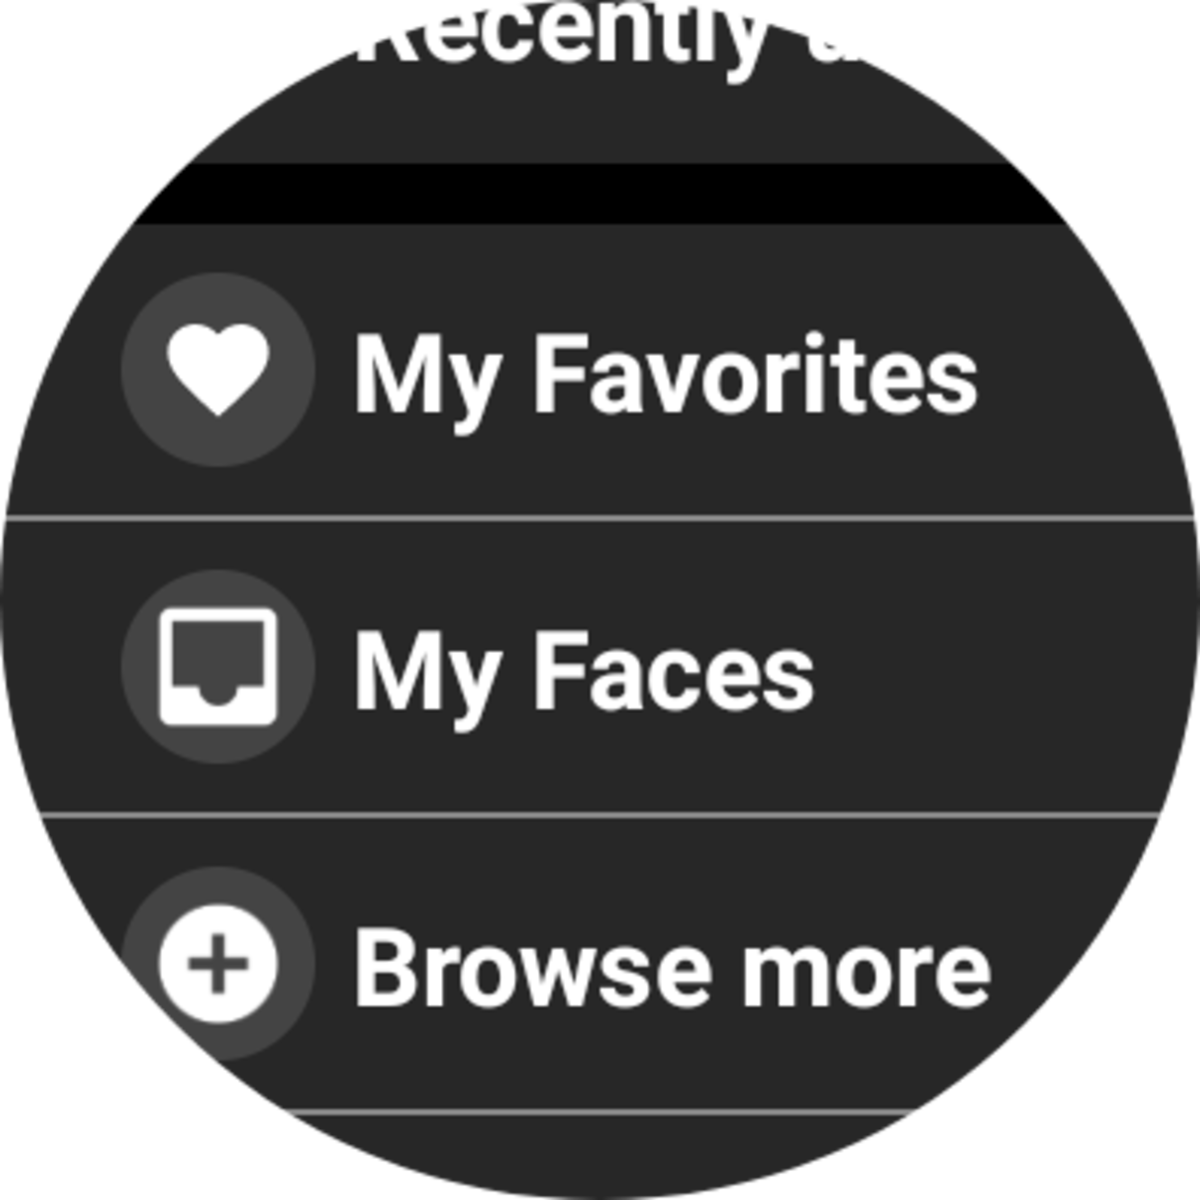 Choose My Faces to set up the Facer app on your Samsung Galaxy 4 watch